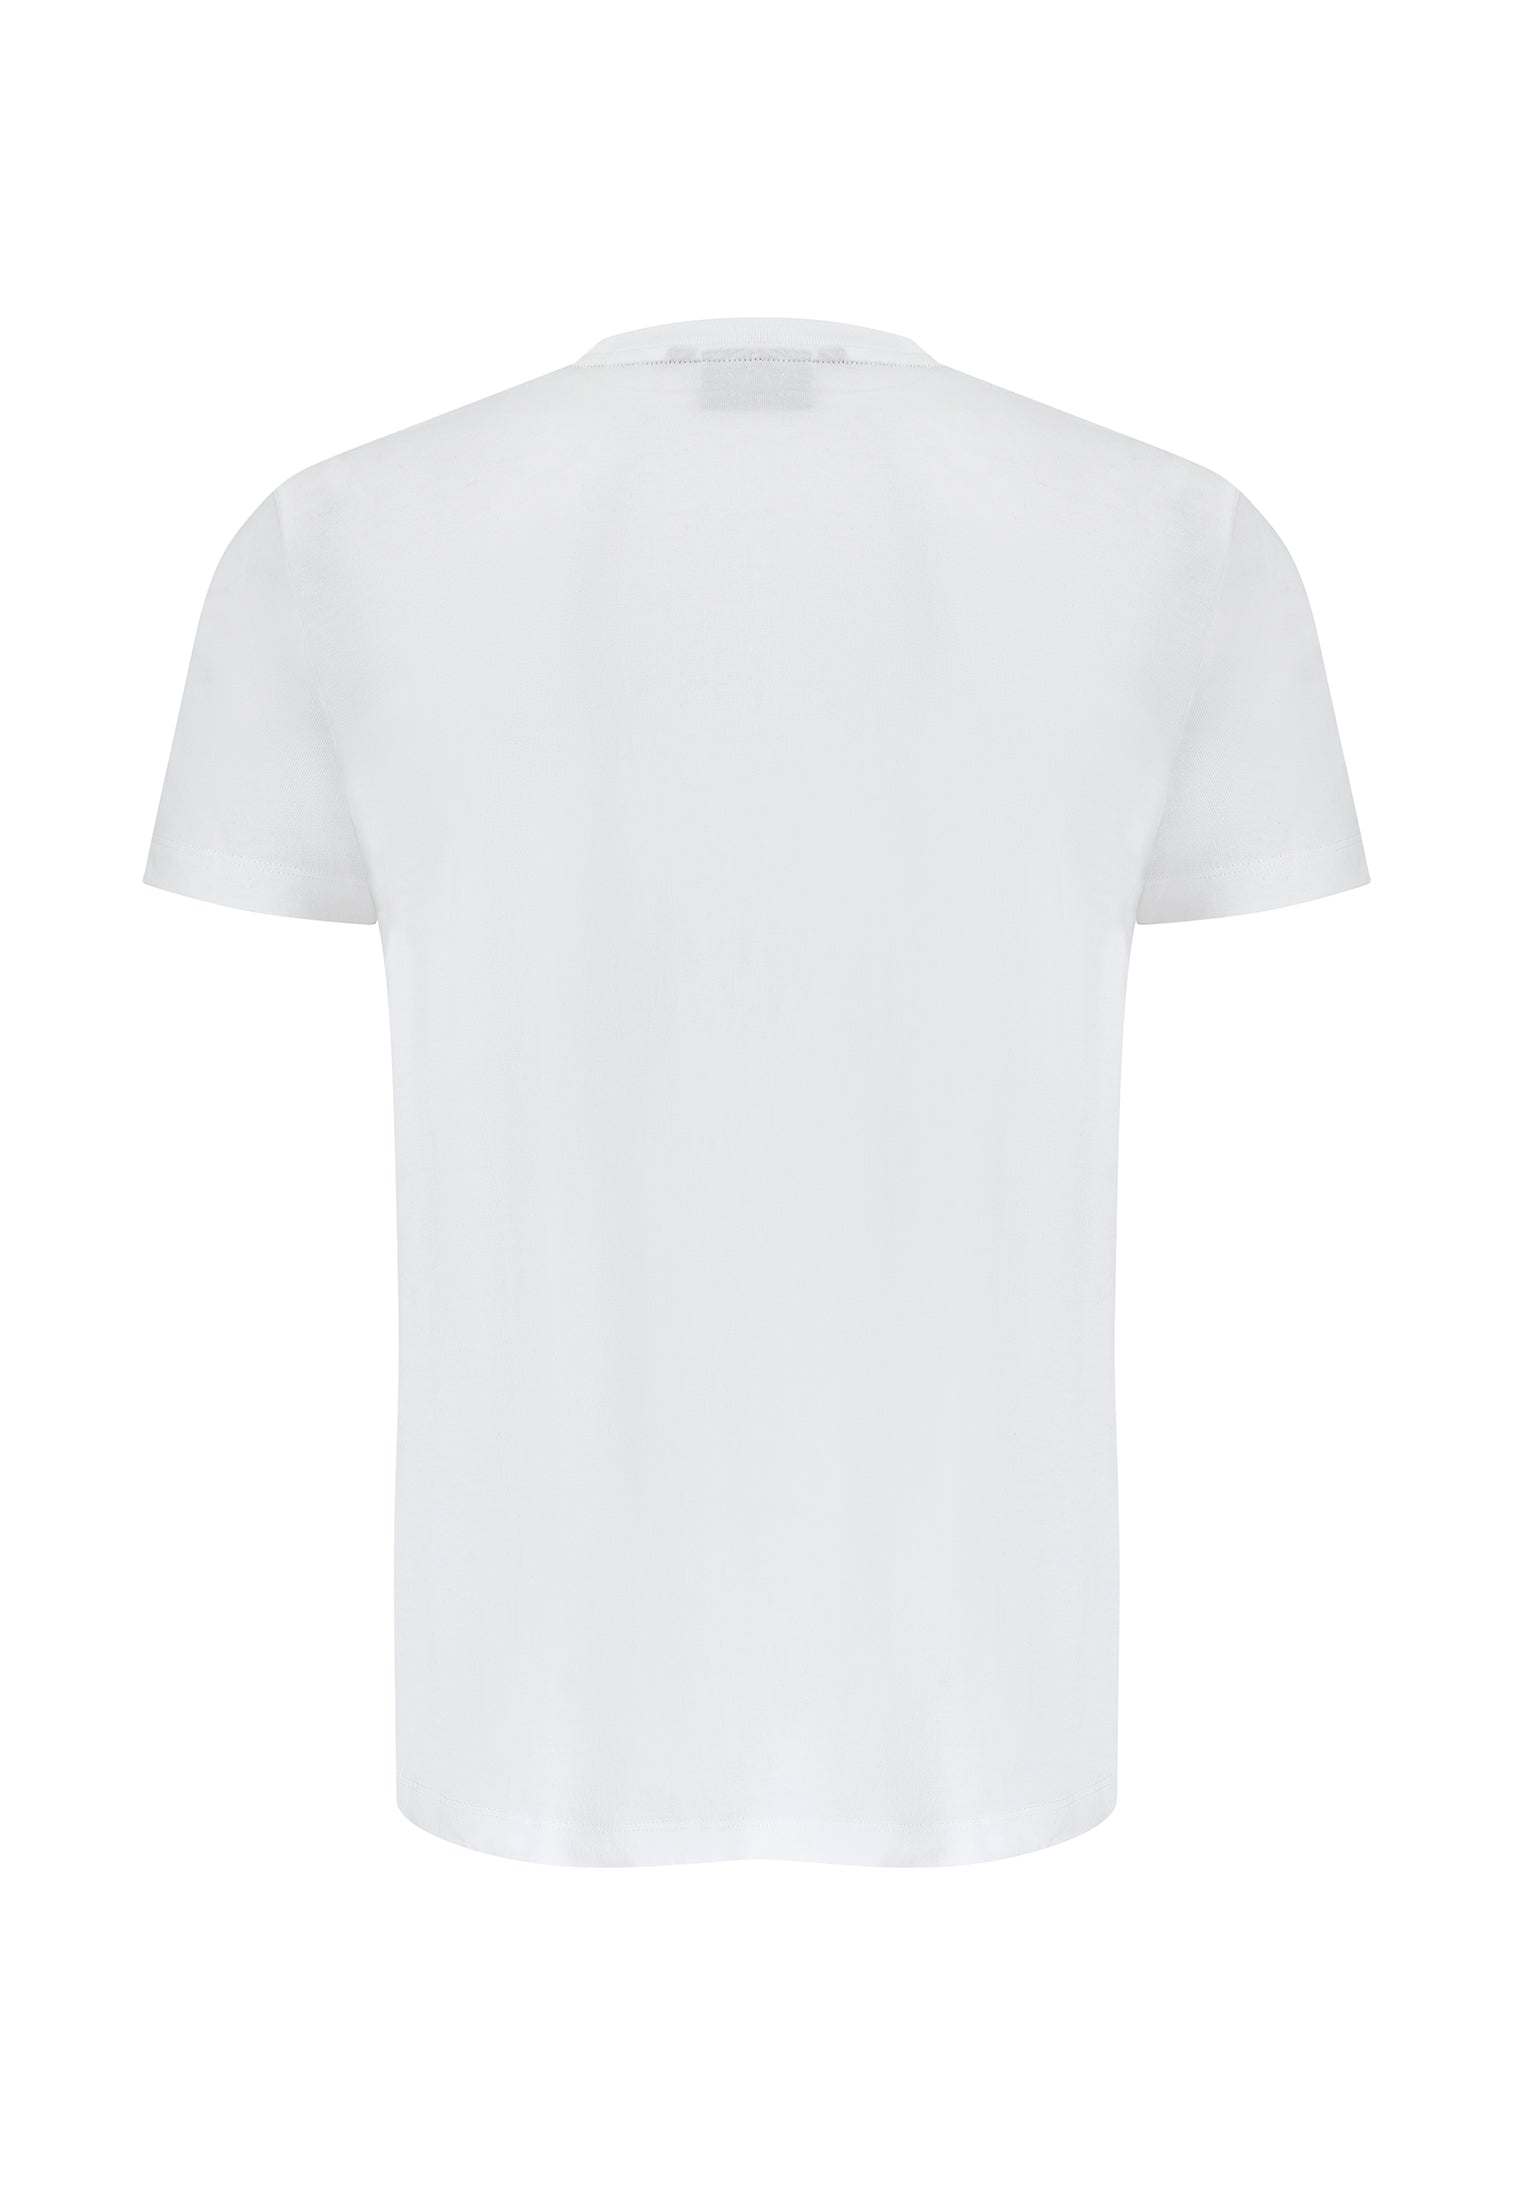 Printed T-Shirt by Merc in White